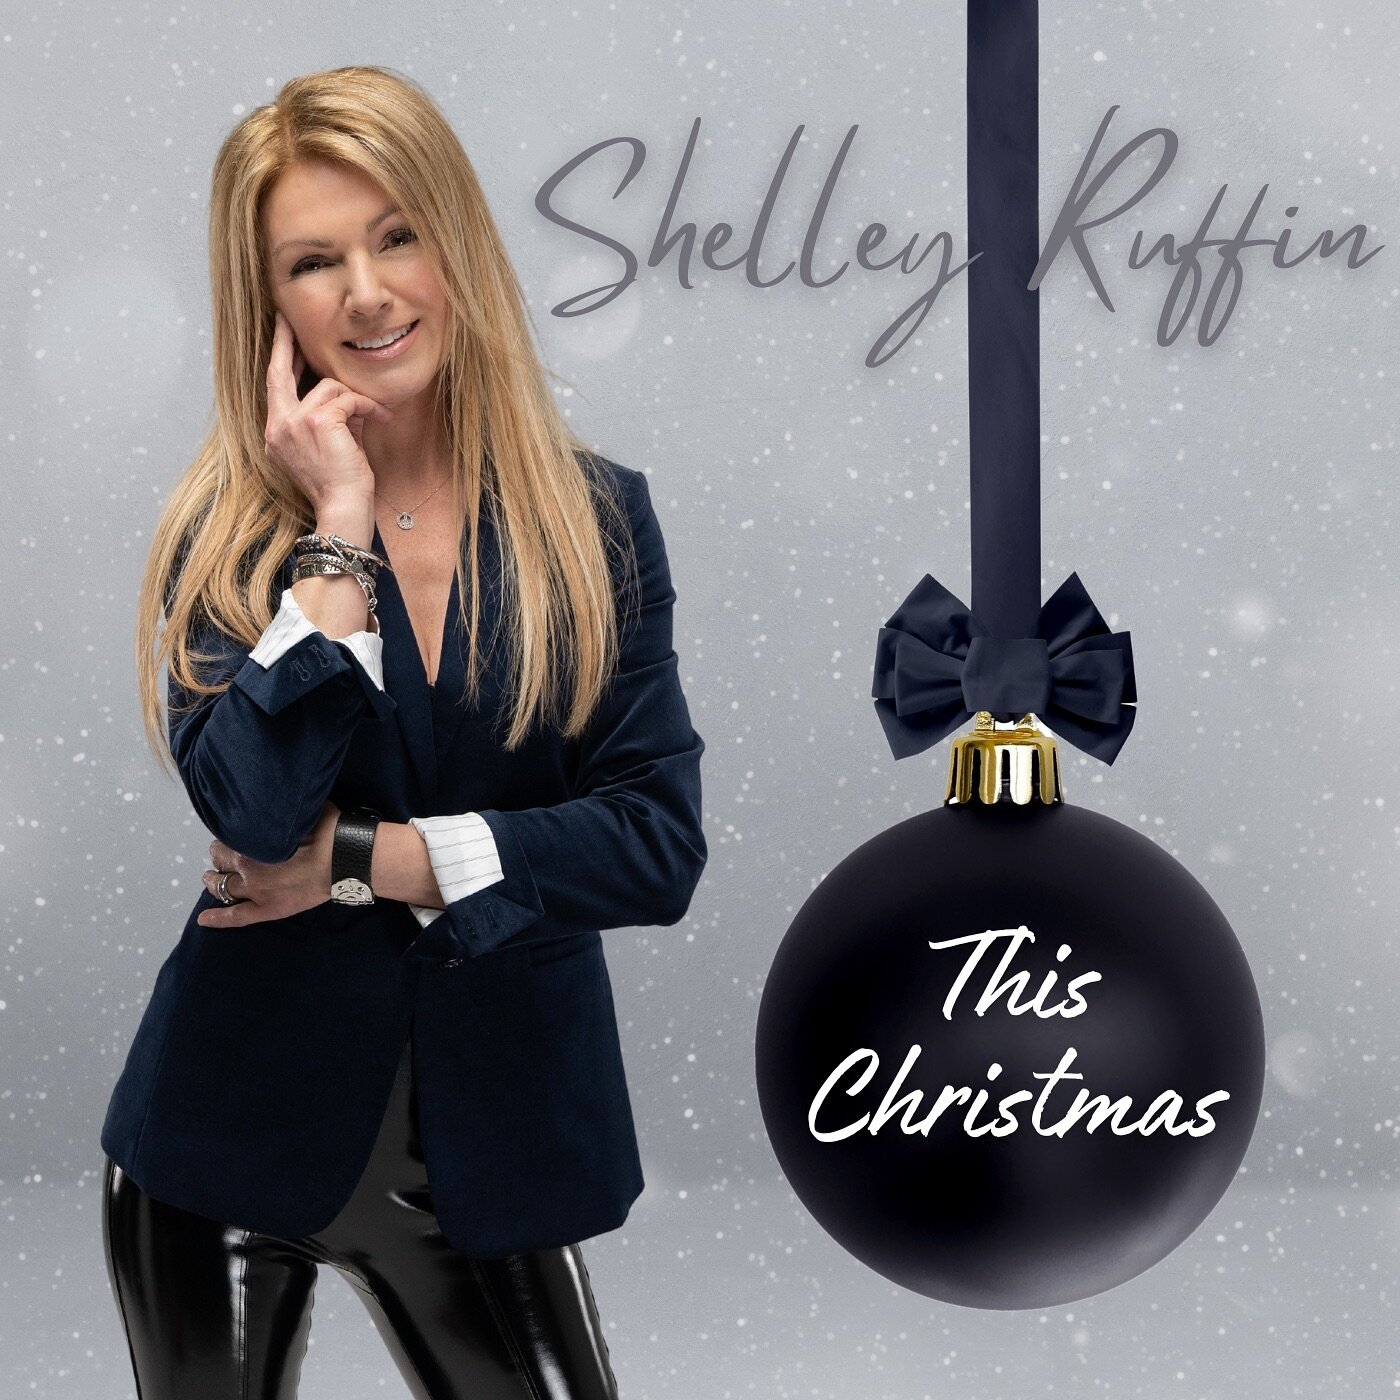 AND....It&rsquo;s Here!! I&rsquo;m SO EXCITED to share with you my latest release, &ldquo;THIS CHRISTMAS&rdquo;! It&rsquo;s now available on all streaming services!  I hope you will SHARE the links, DOWNLOAD the song into your library and PLAY IT ON 